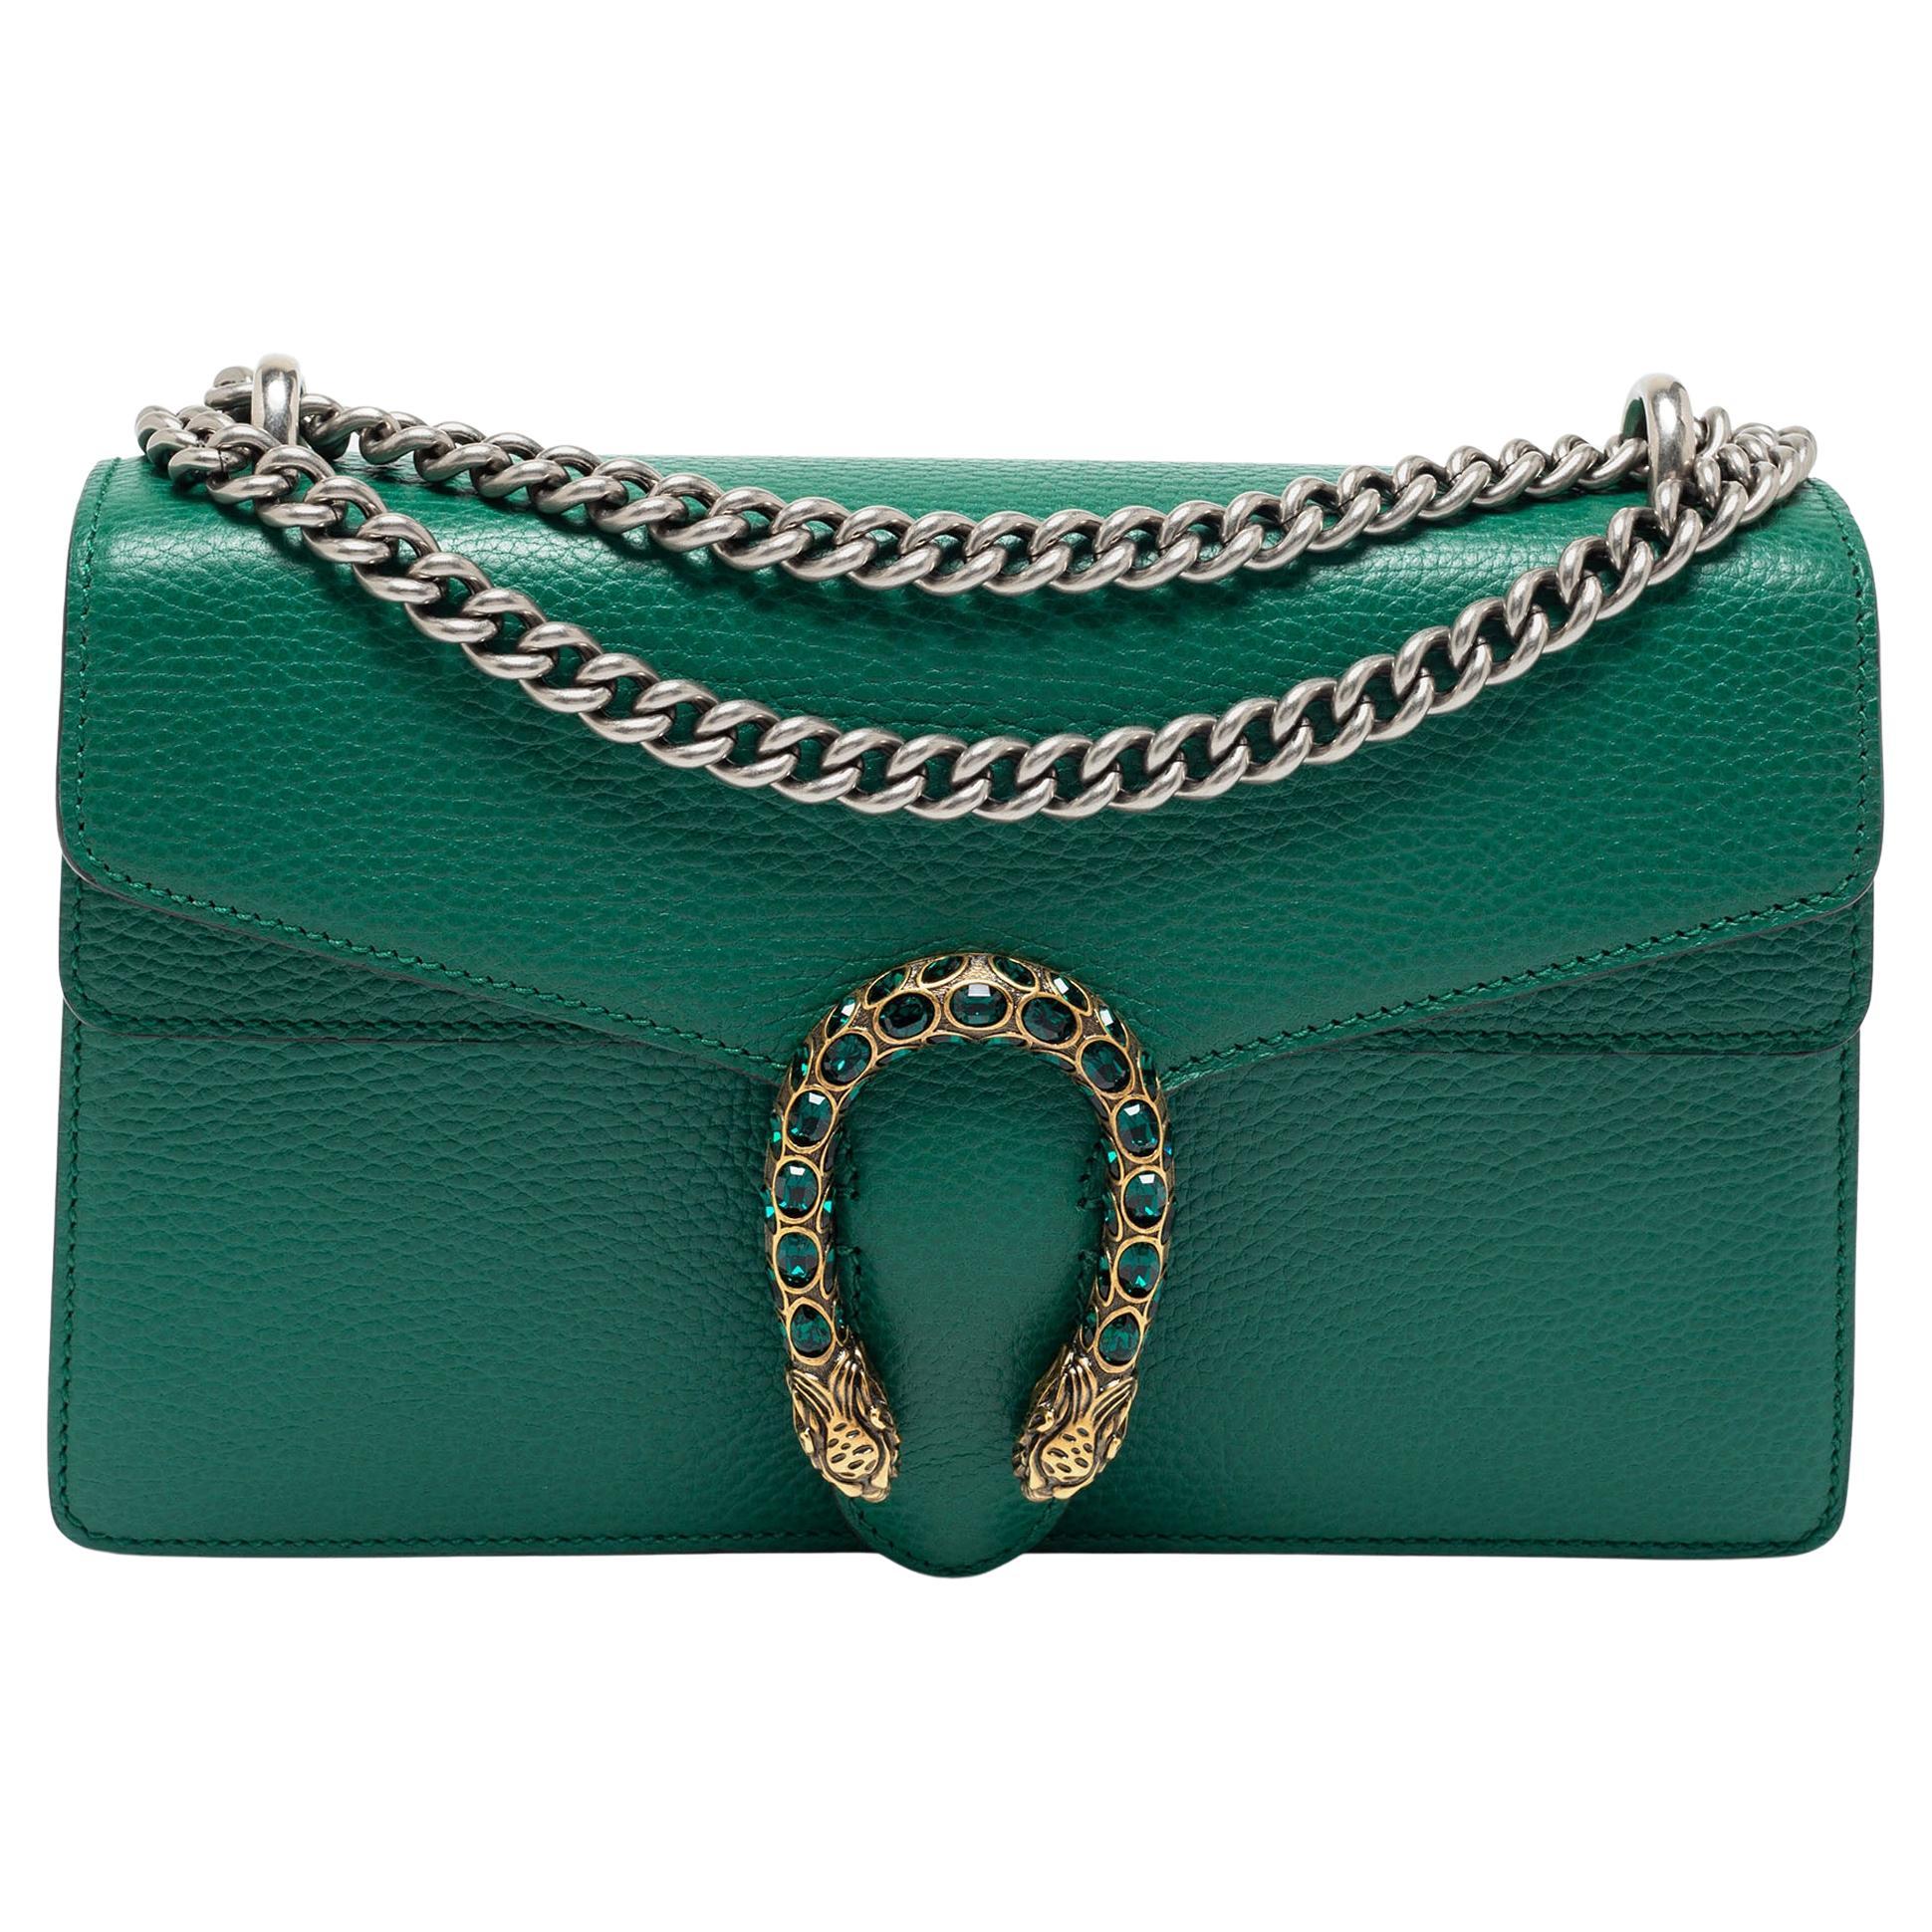 Gucci Green Leather Small Dionysus Shoulder bag